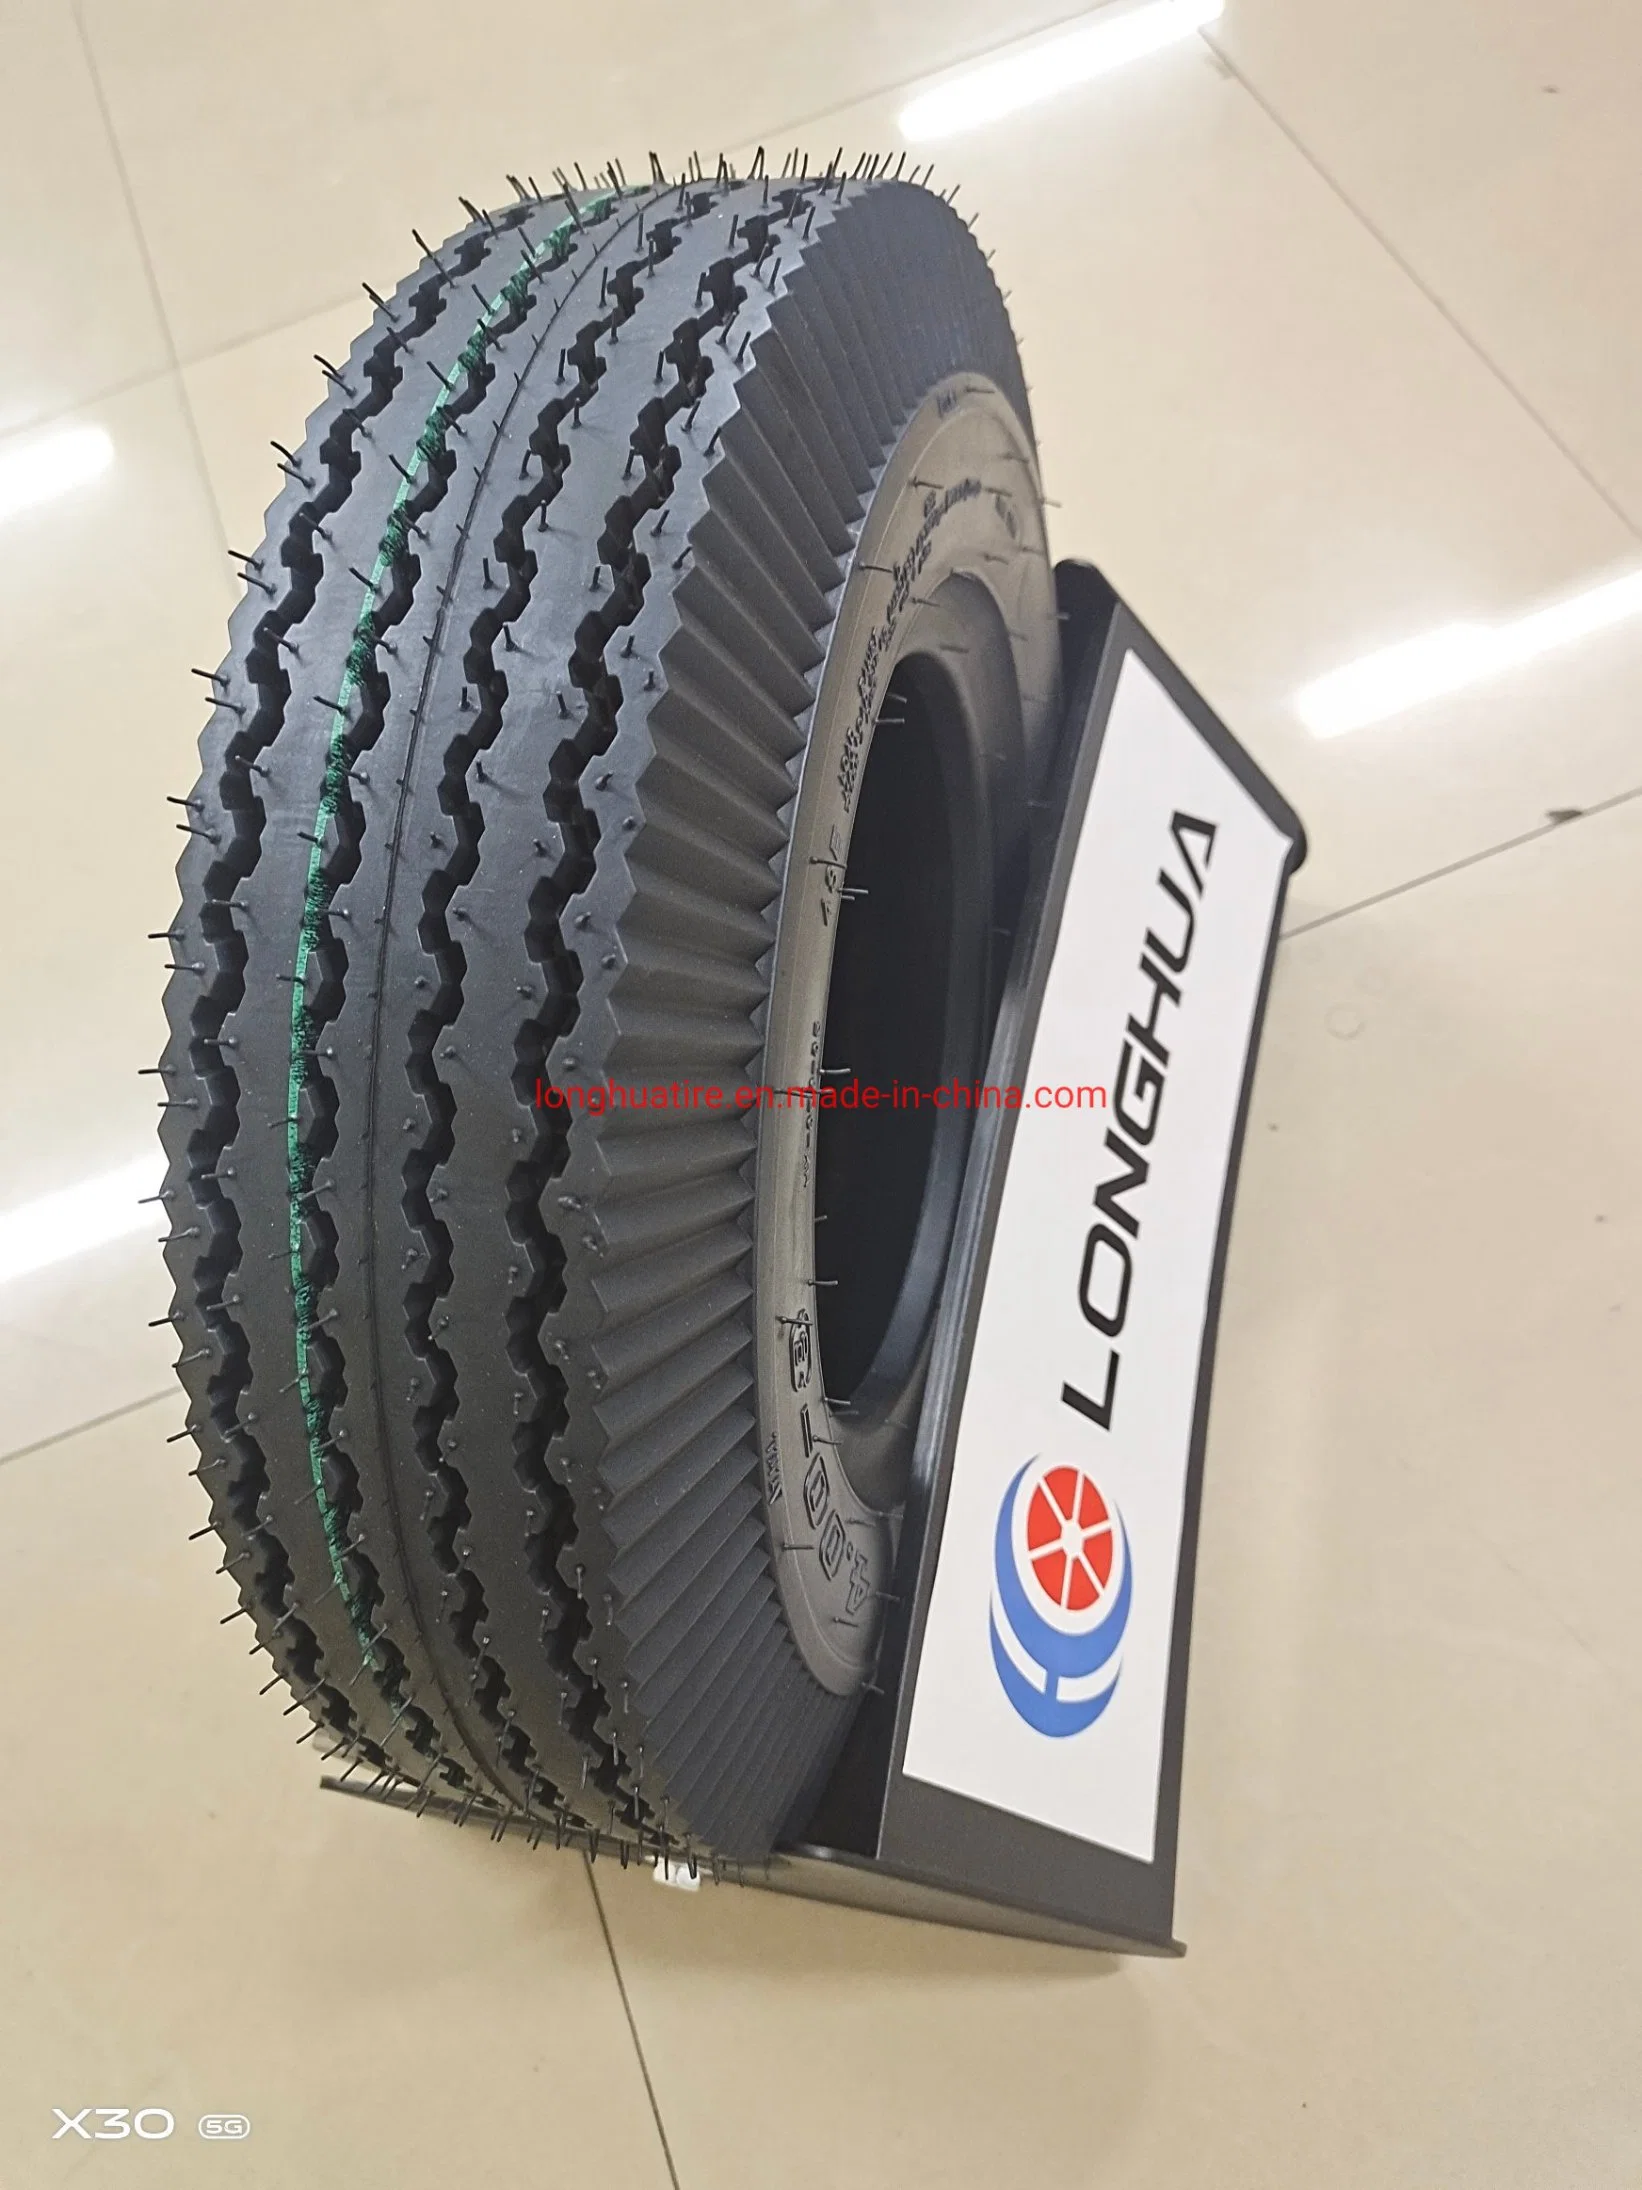 Qingdao Factory Supply Best Quality Motorcycle Tire (3.00-18 3.25-18 100/90-18)